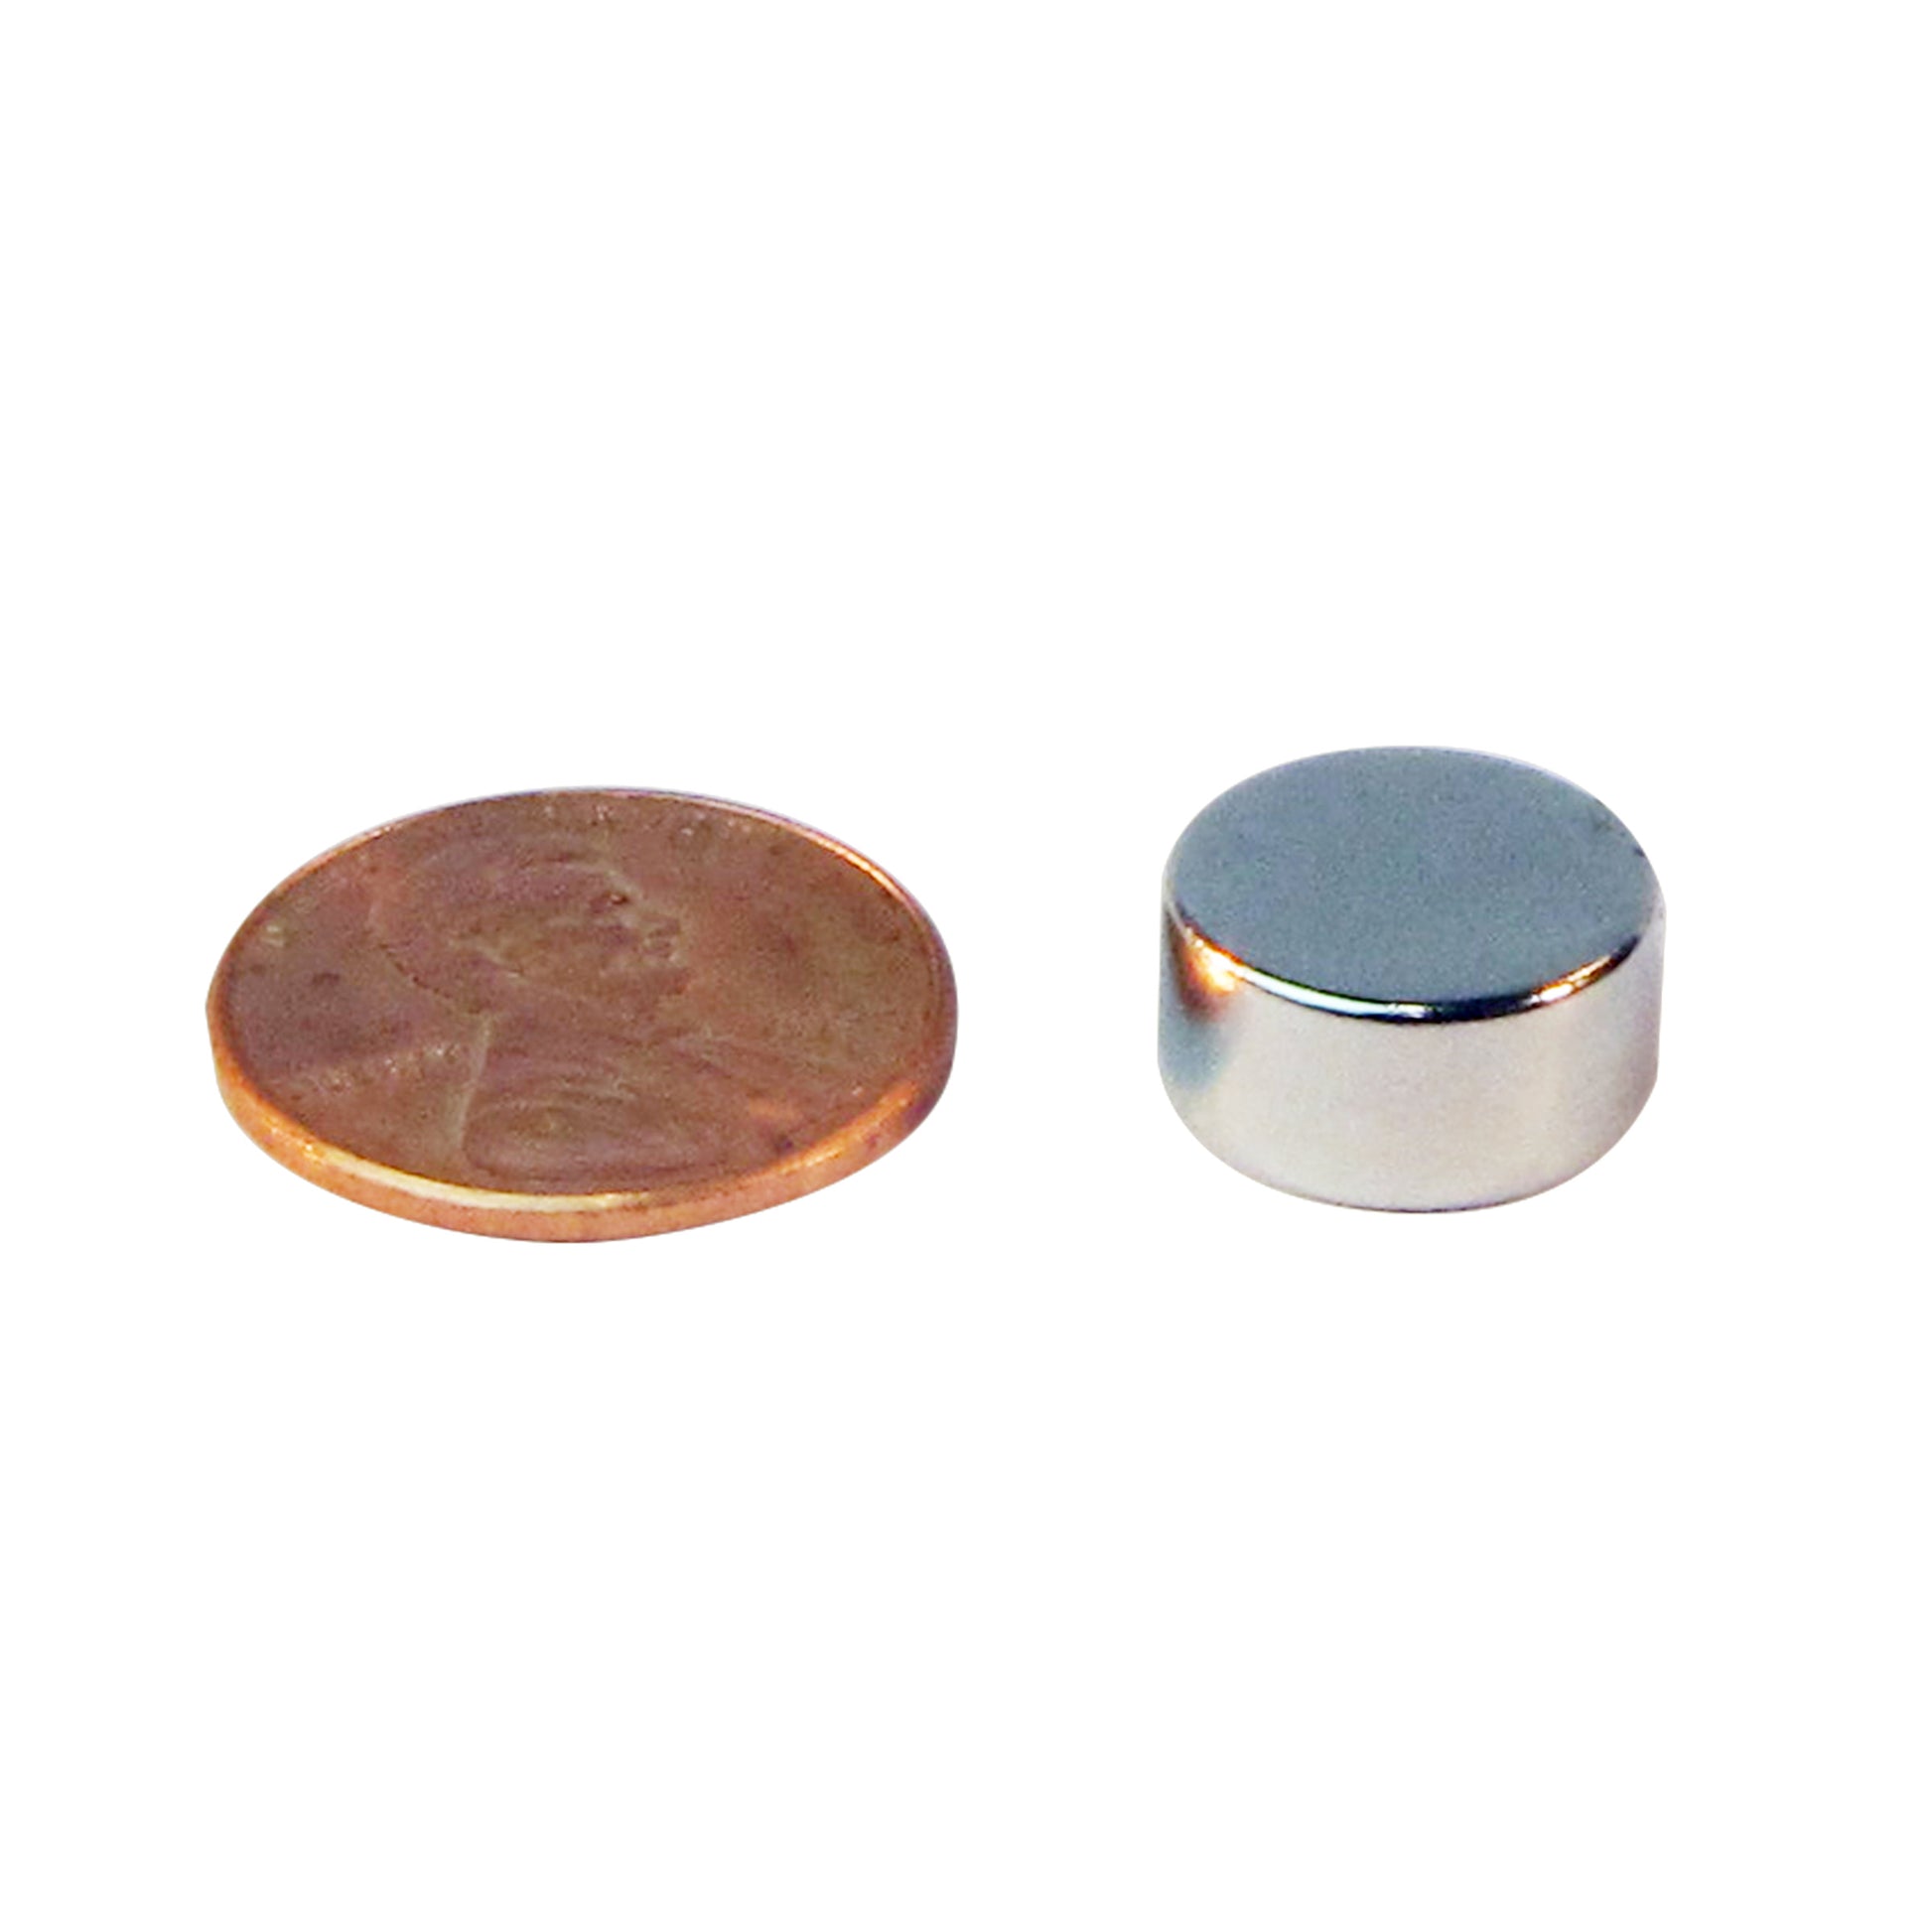 Load image into Gallery viewer, ND143N-35 Neodymium Disc Magnet - Compared to Penny for Size Reference